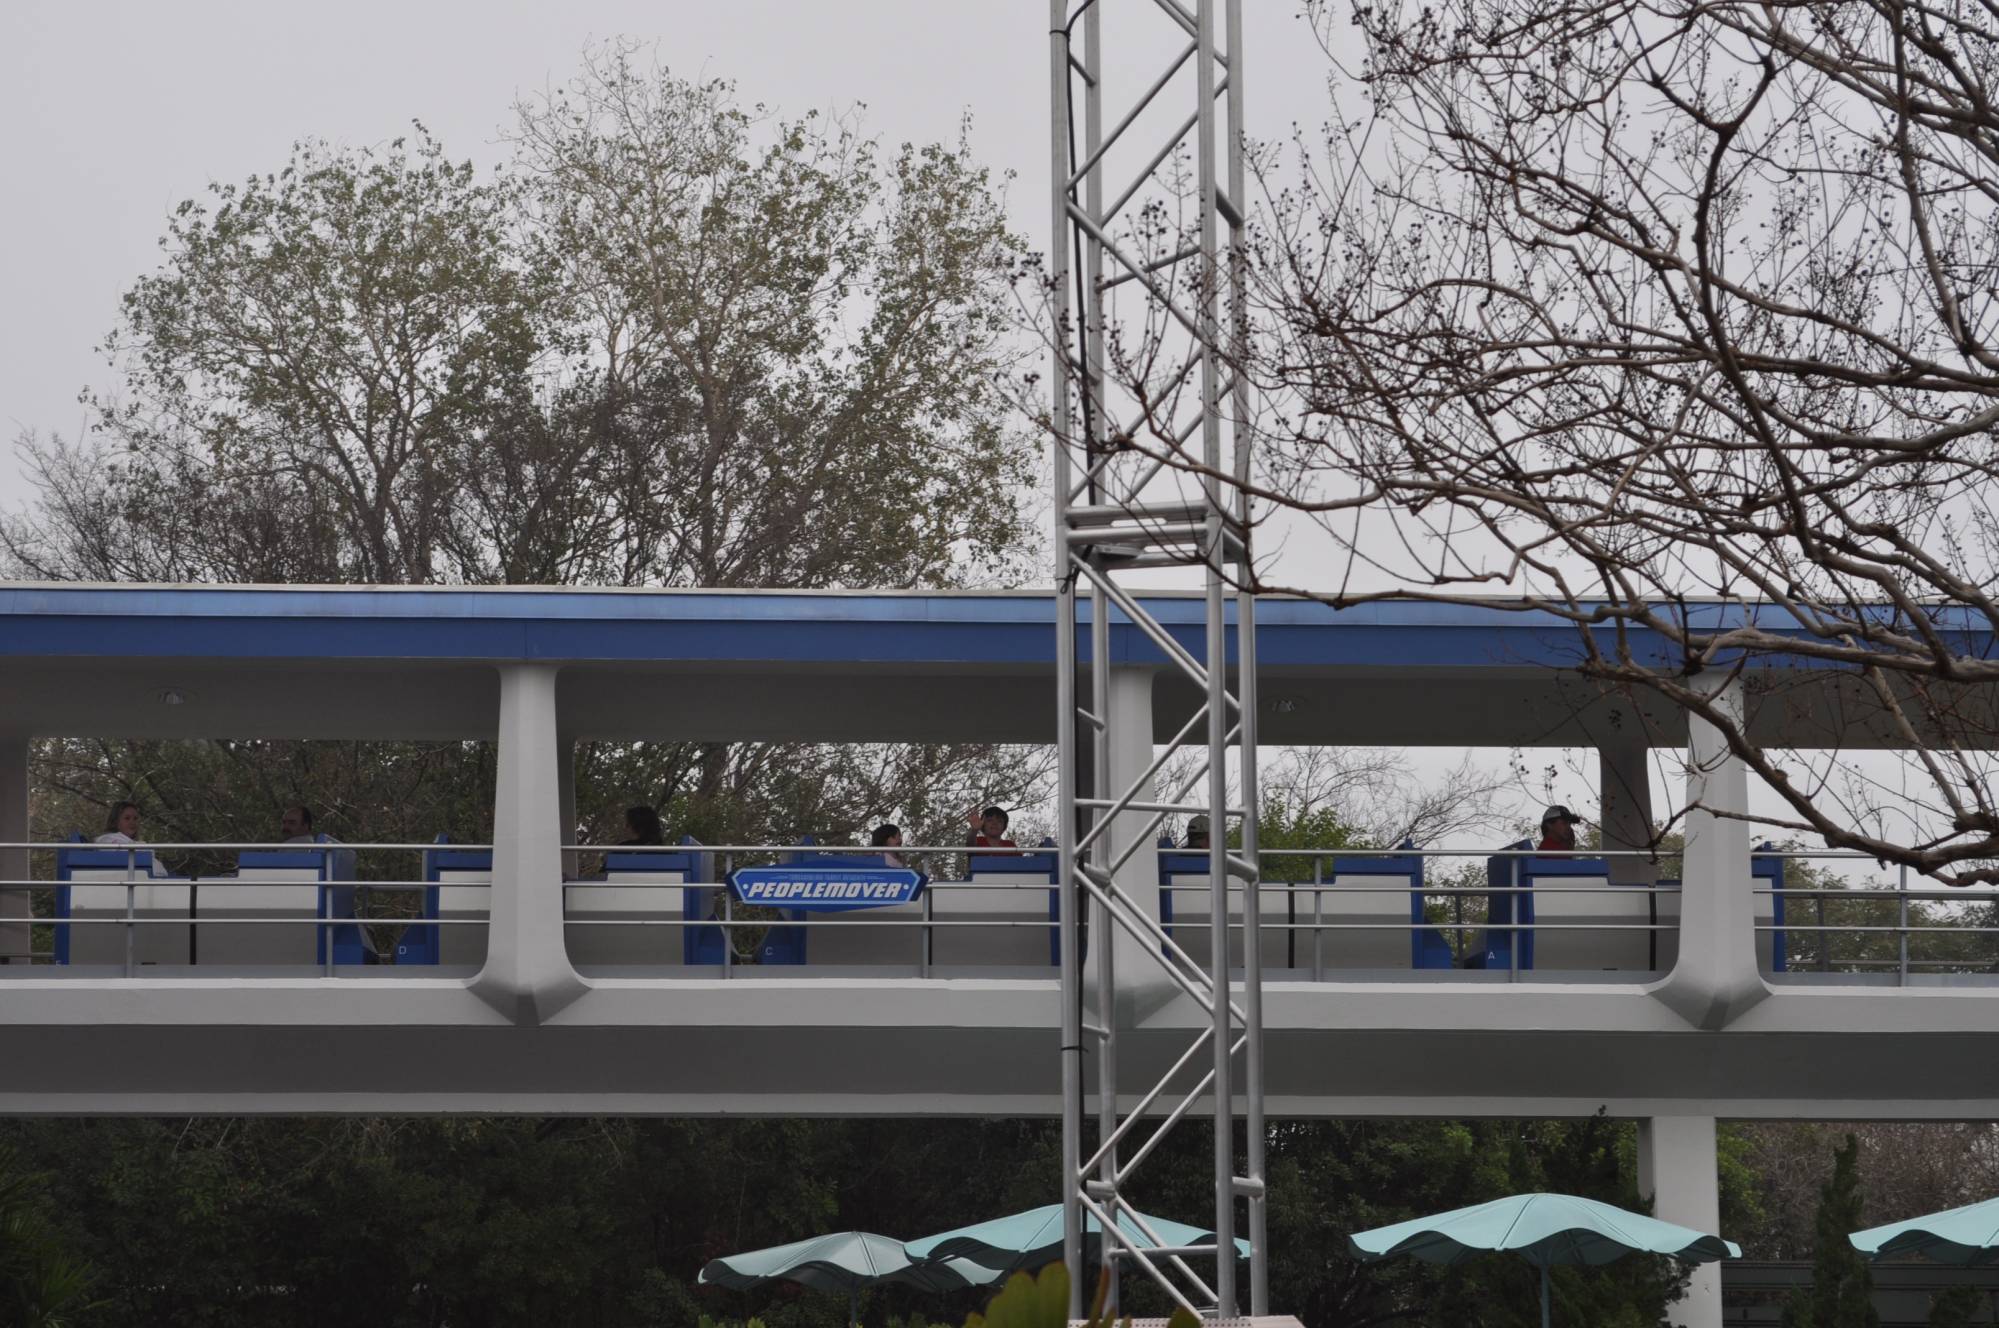 Tomorrowland - People Mover